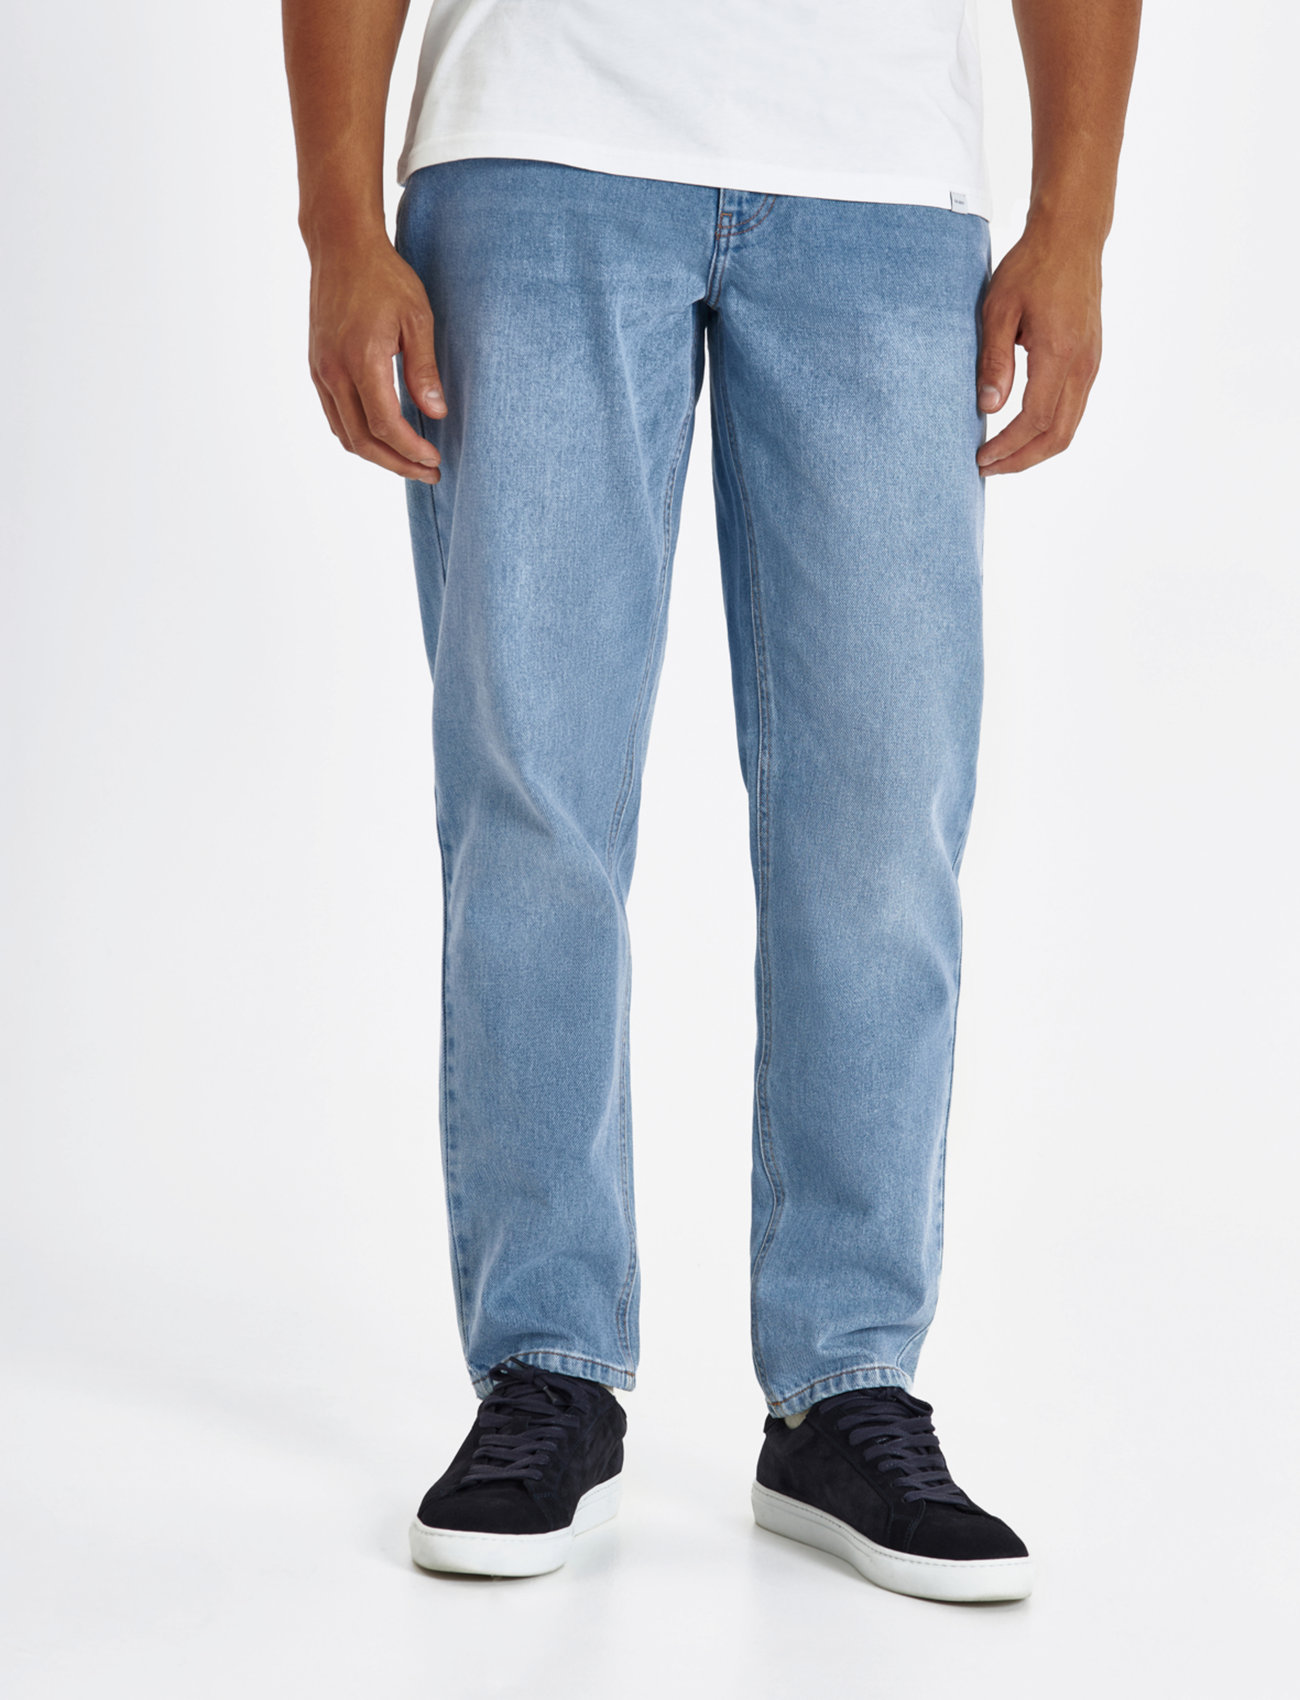 Les Deux Ryder Relaxed Fit Jeans - Relaxed jeans 